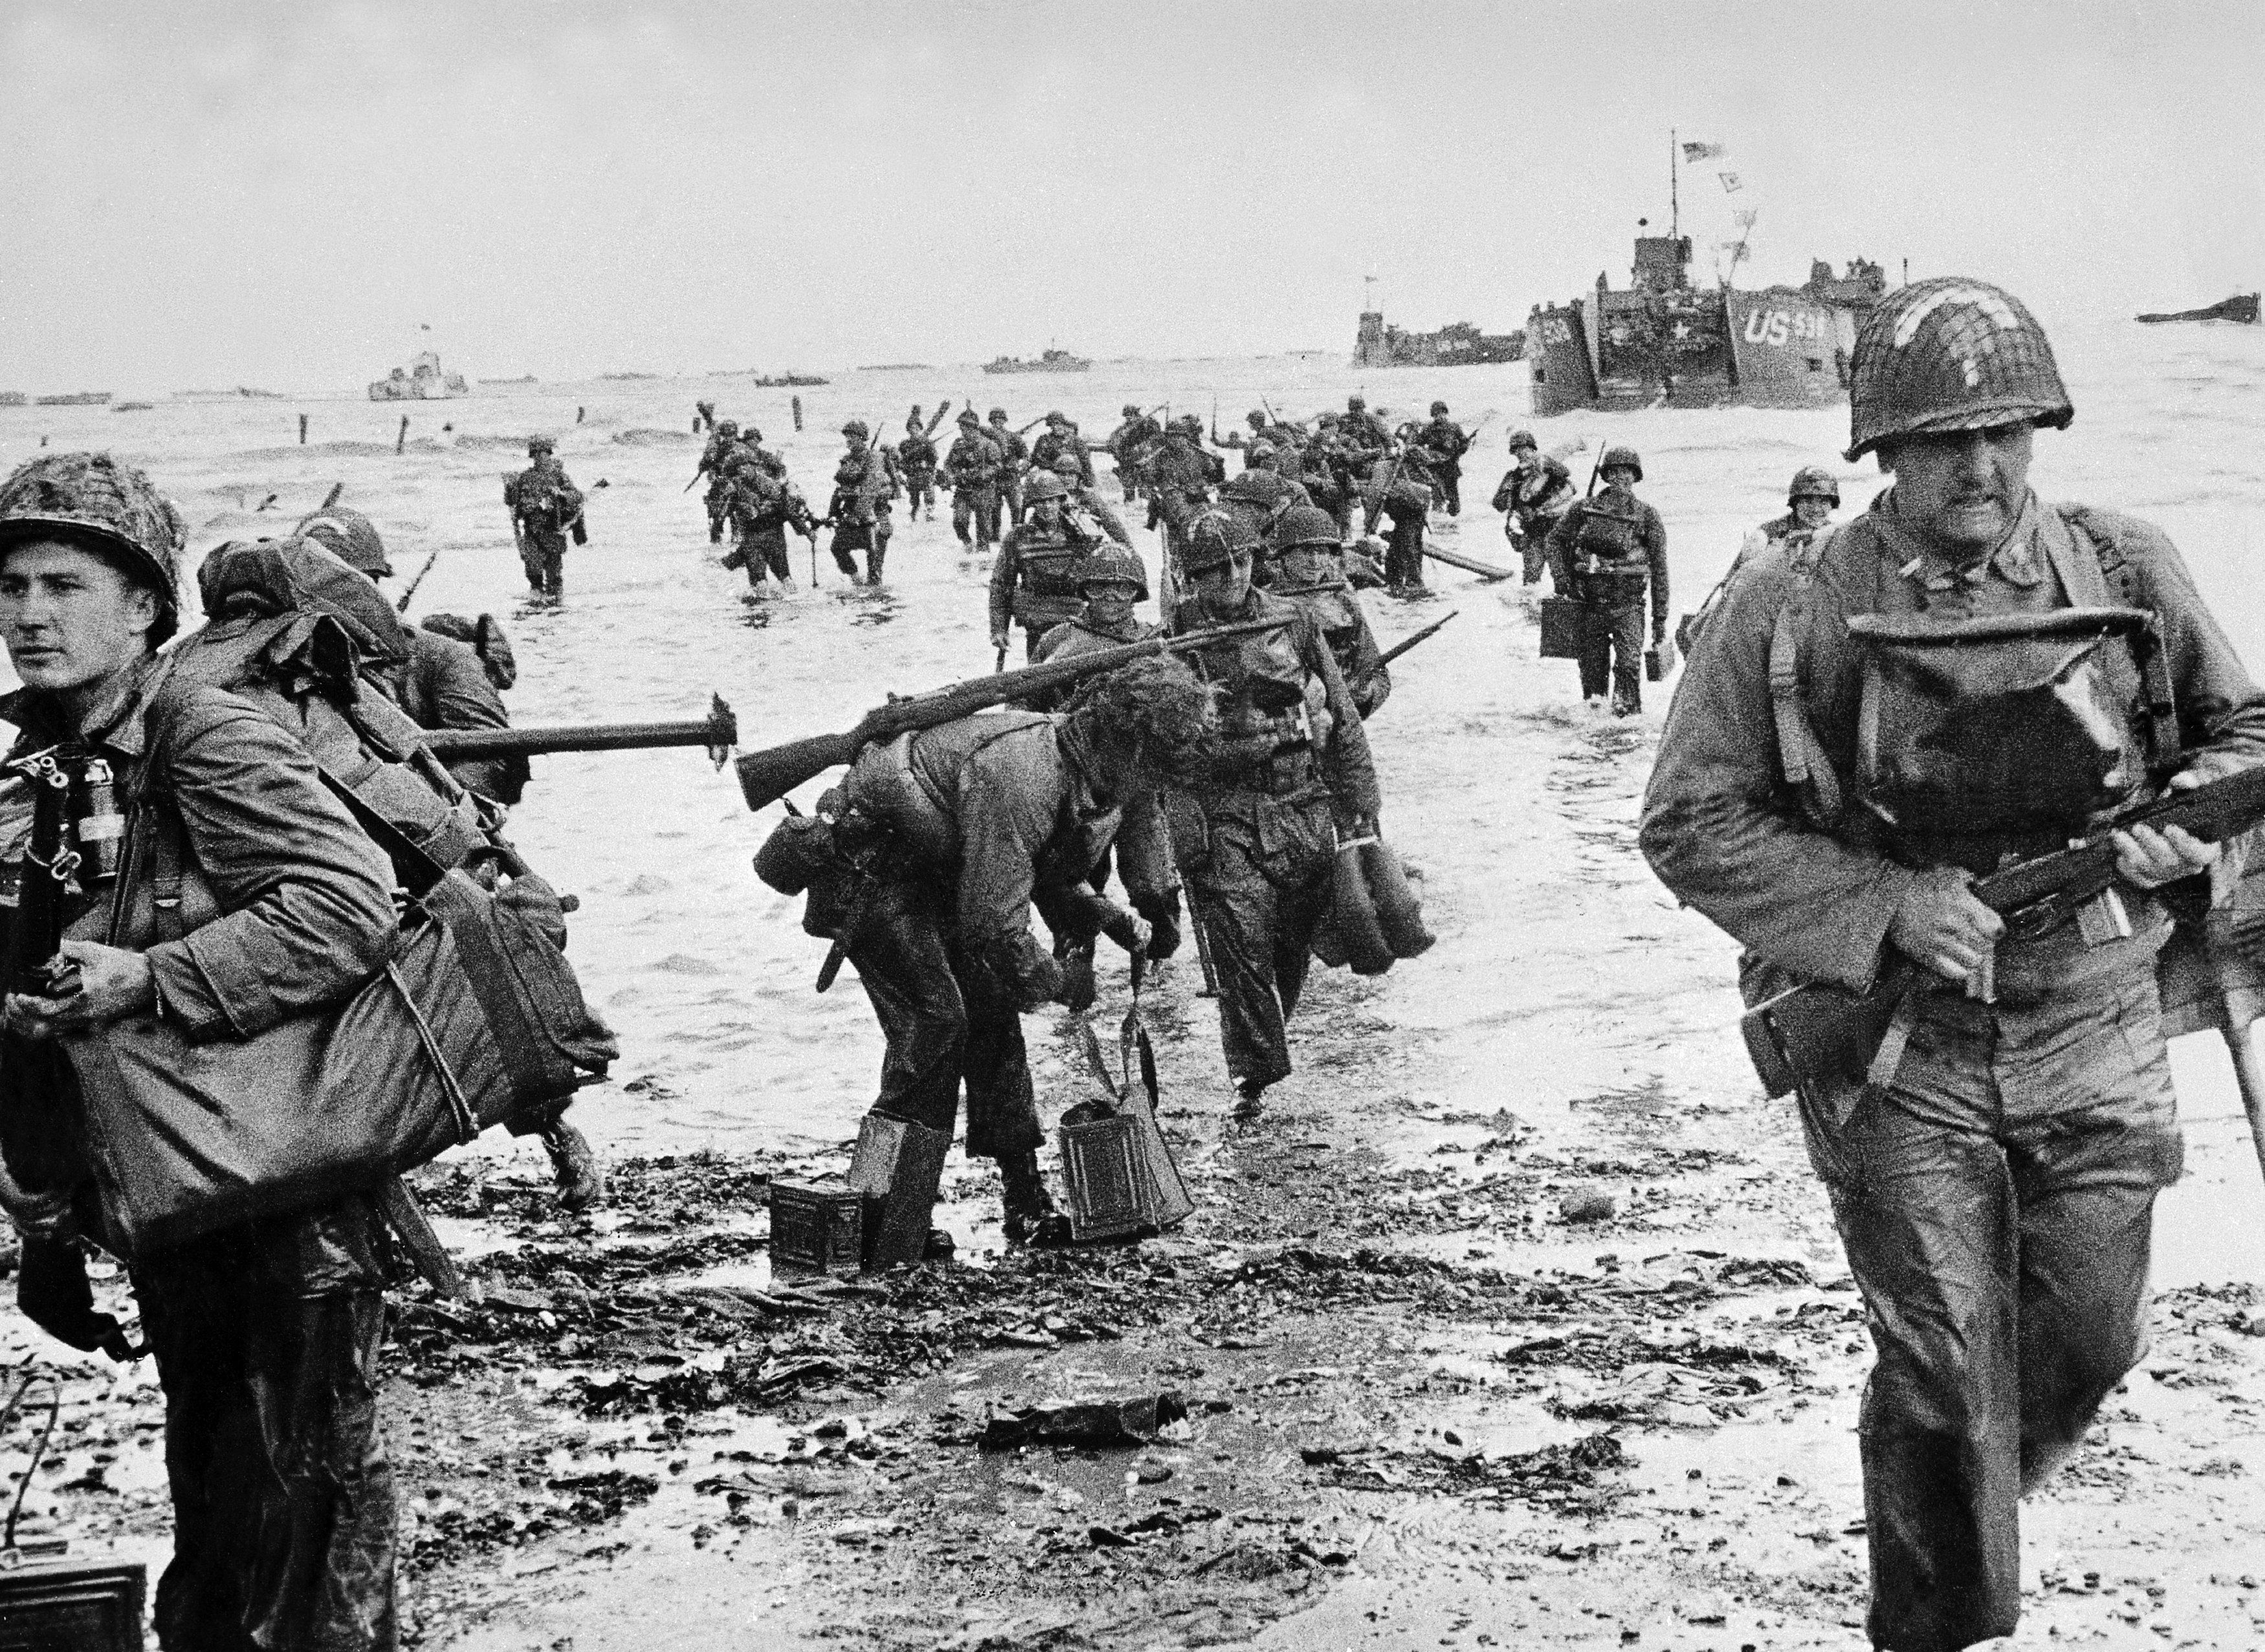 American soldiers, their feet in water, land on a Normandy beach on June 6, 1944. (Keystone-France—Gamma-Keystone/Getty Images)